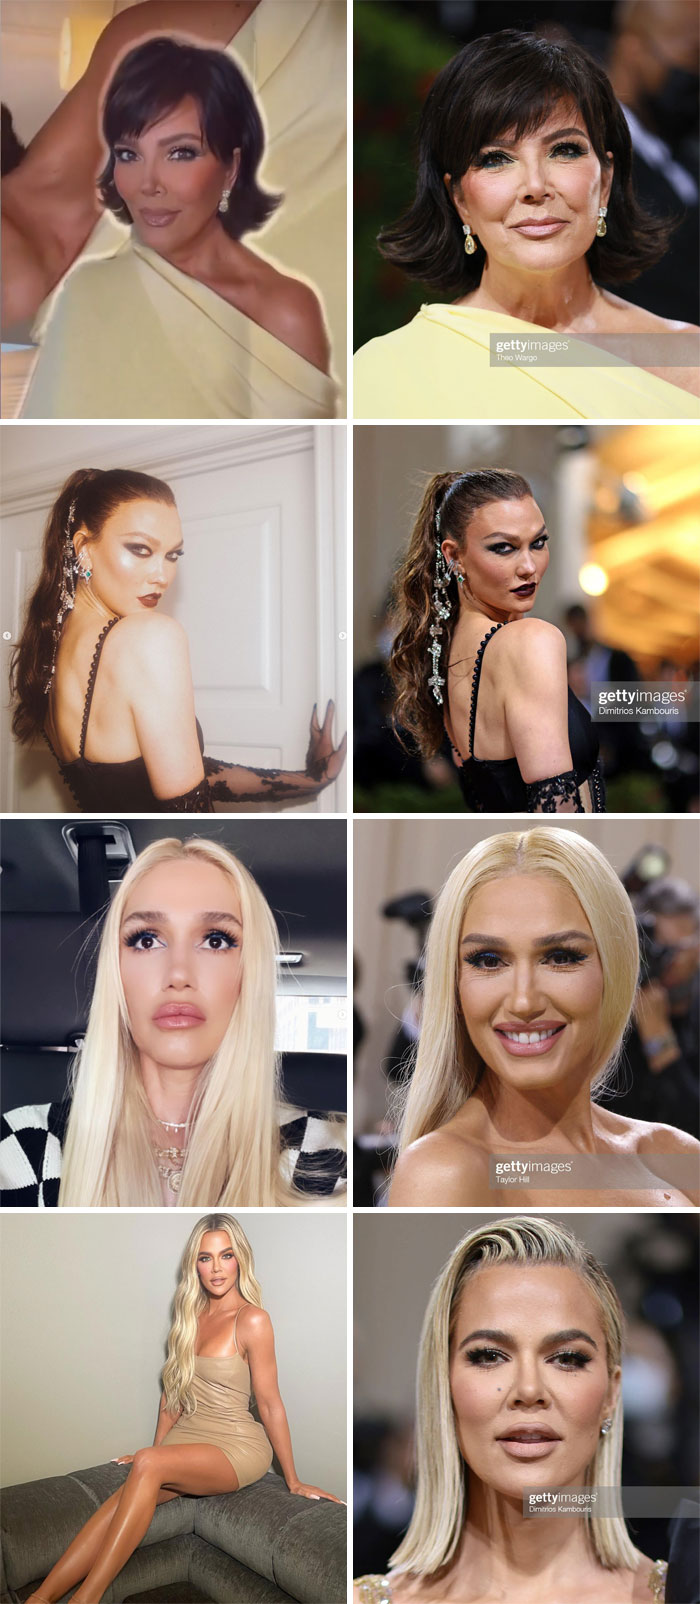 Some Unfiltered/Unedited Photos From The Met Gala Versus Their Ig Equivalents Or Most Recently Posted Photos